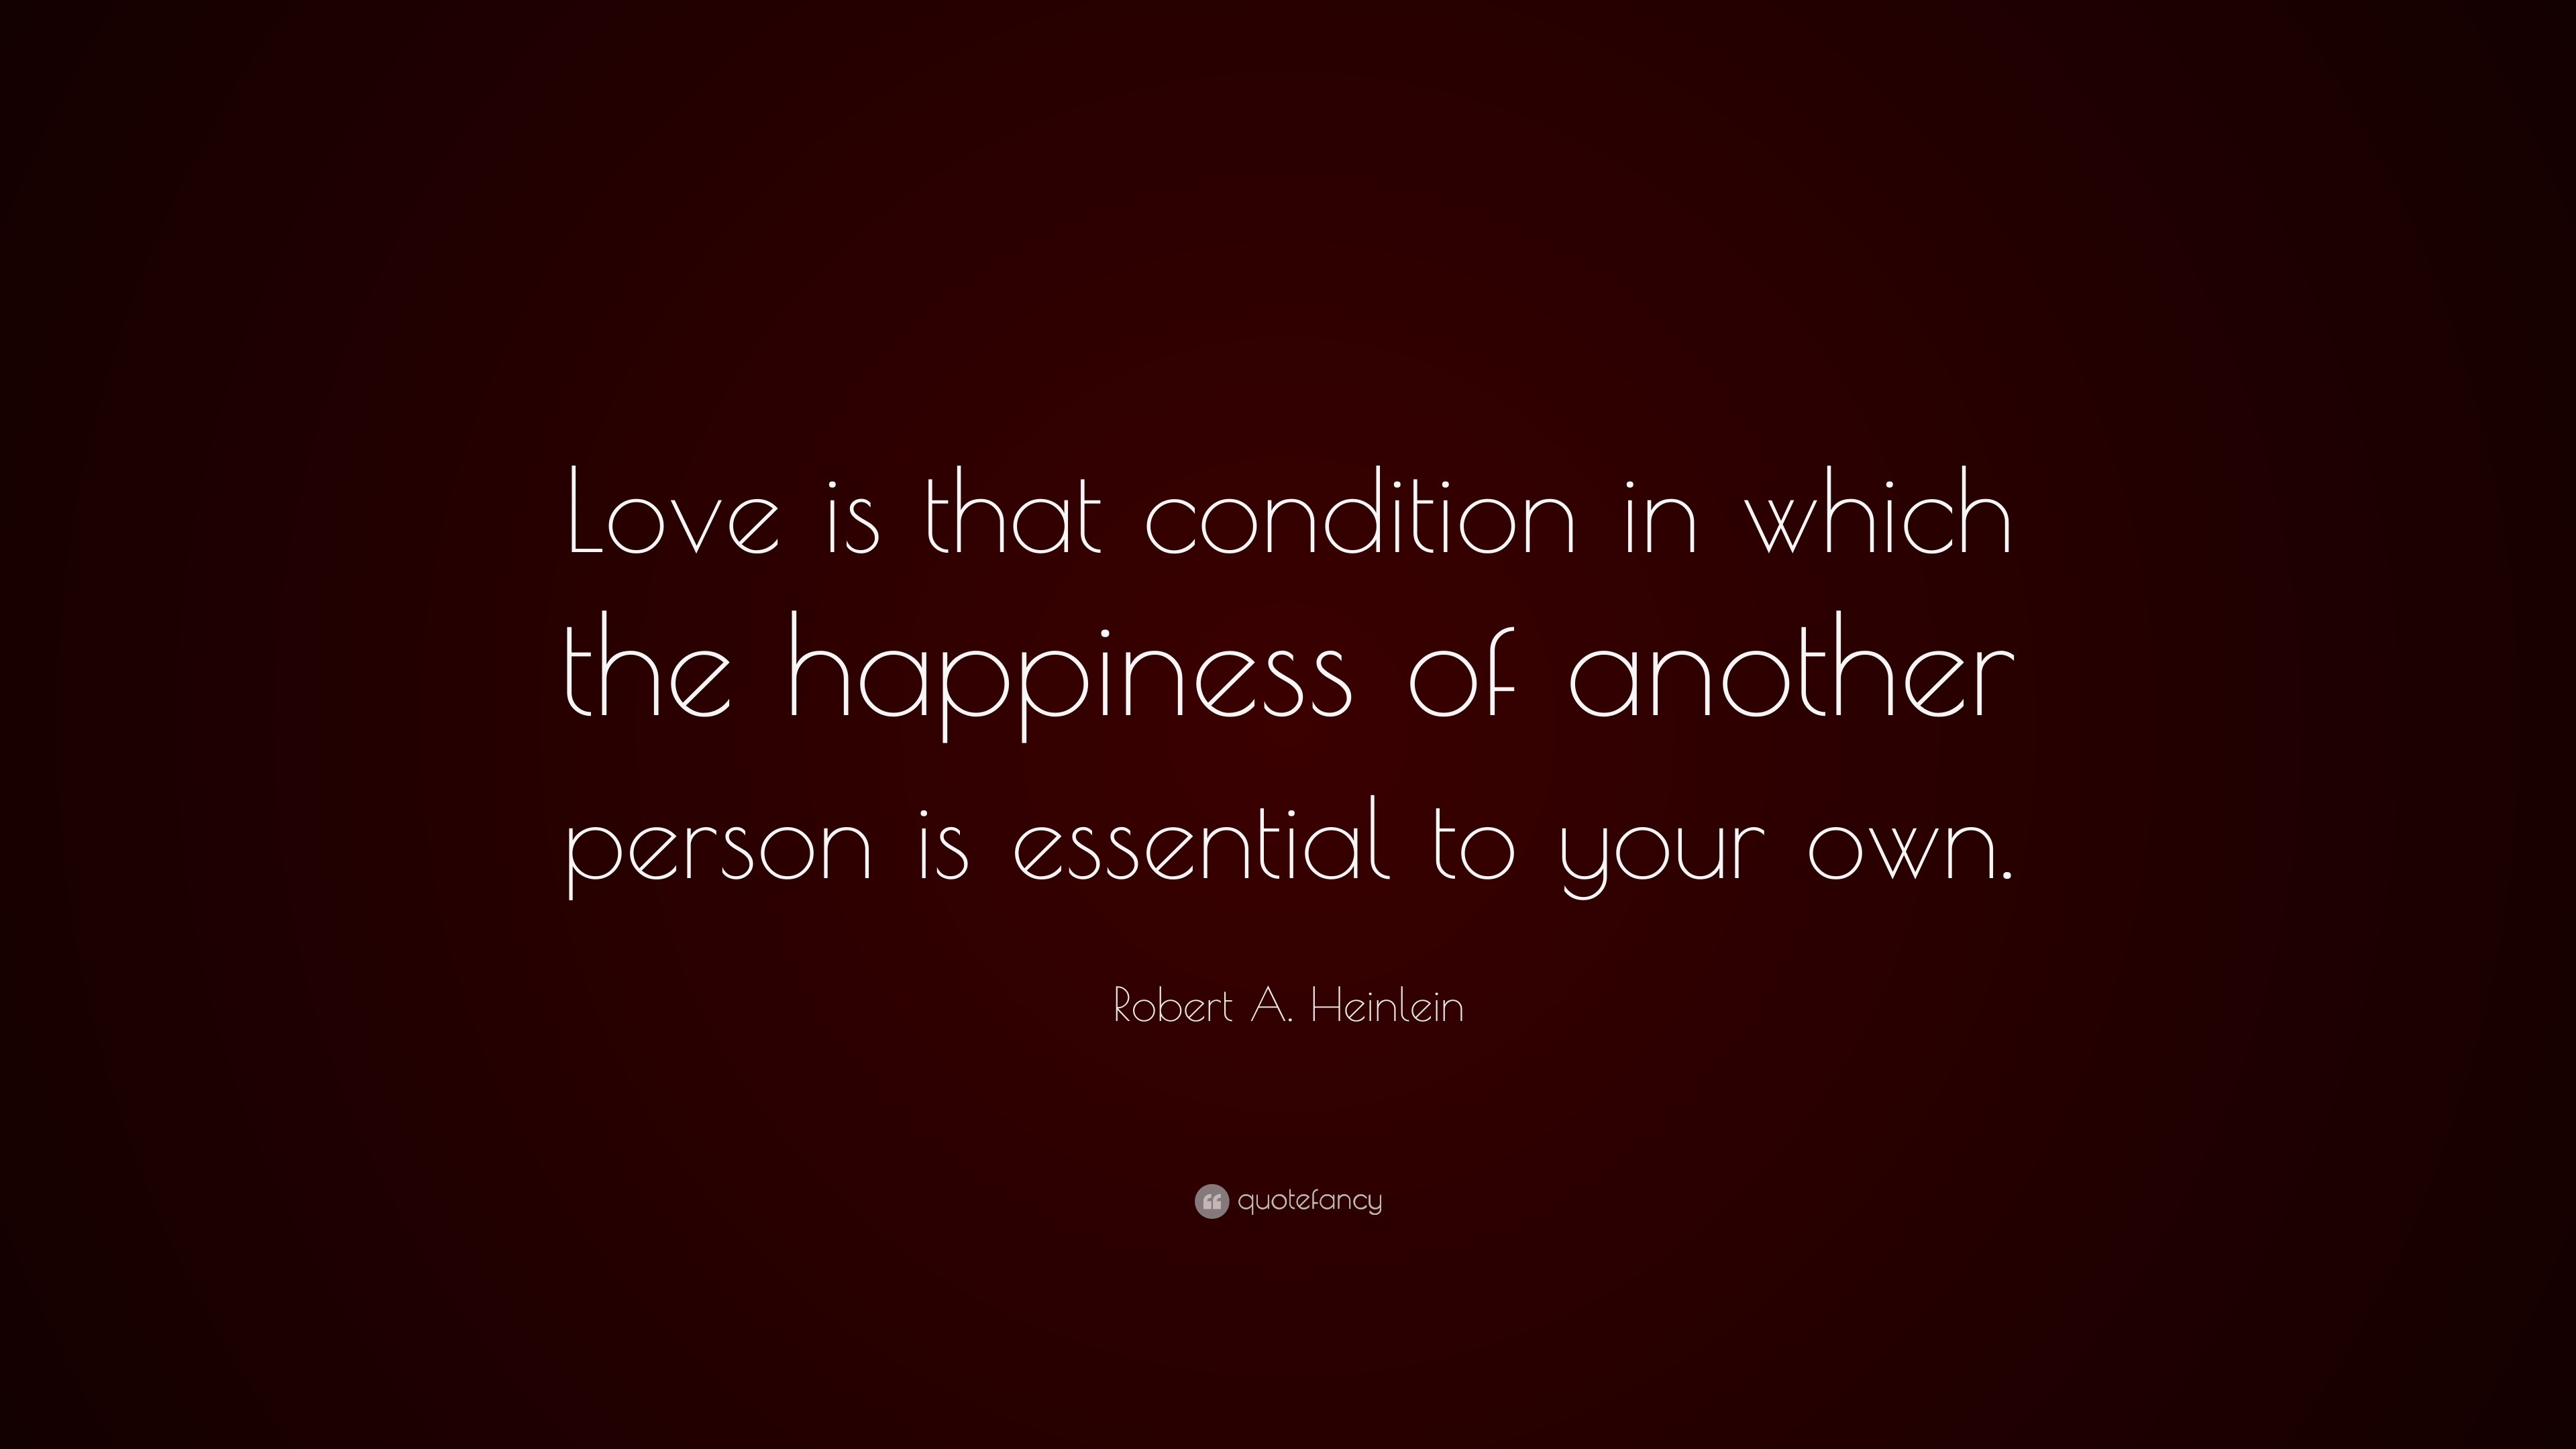 Robert A. Heinlein Quote: “Love is that condition in which the ...